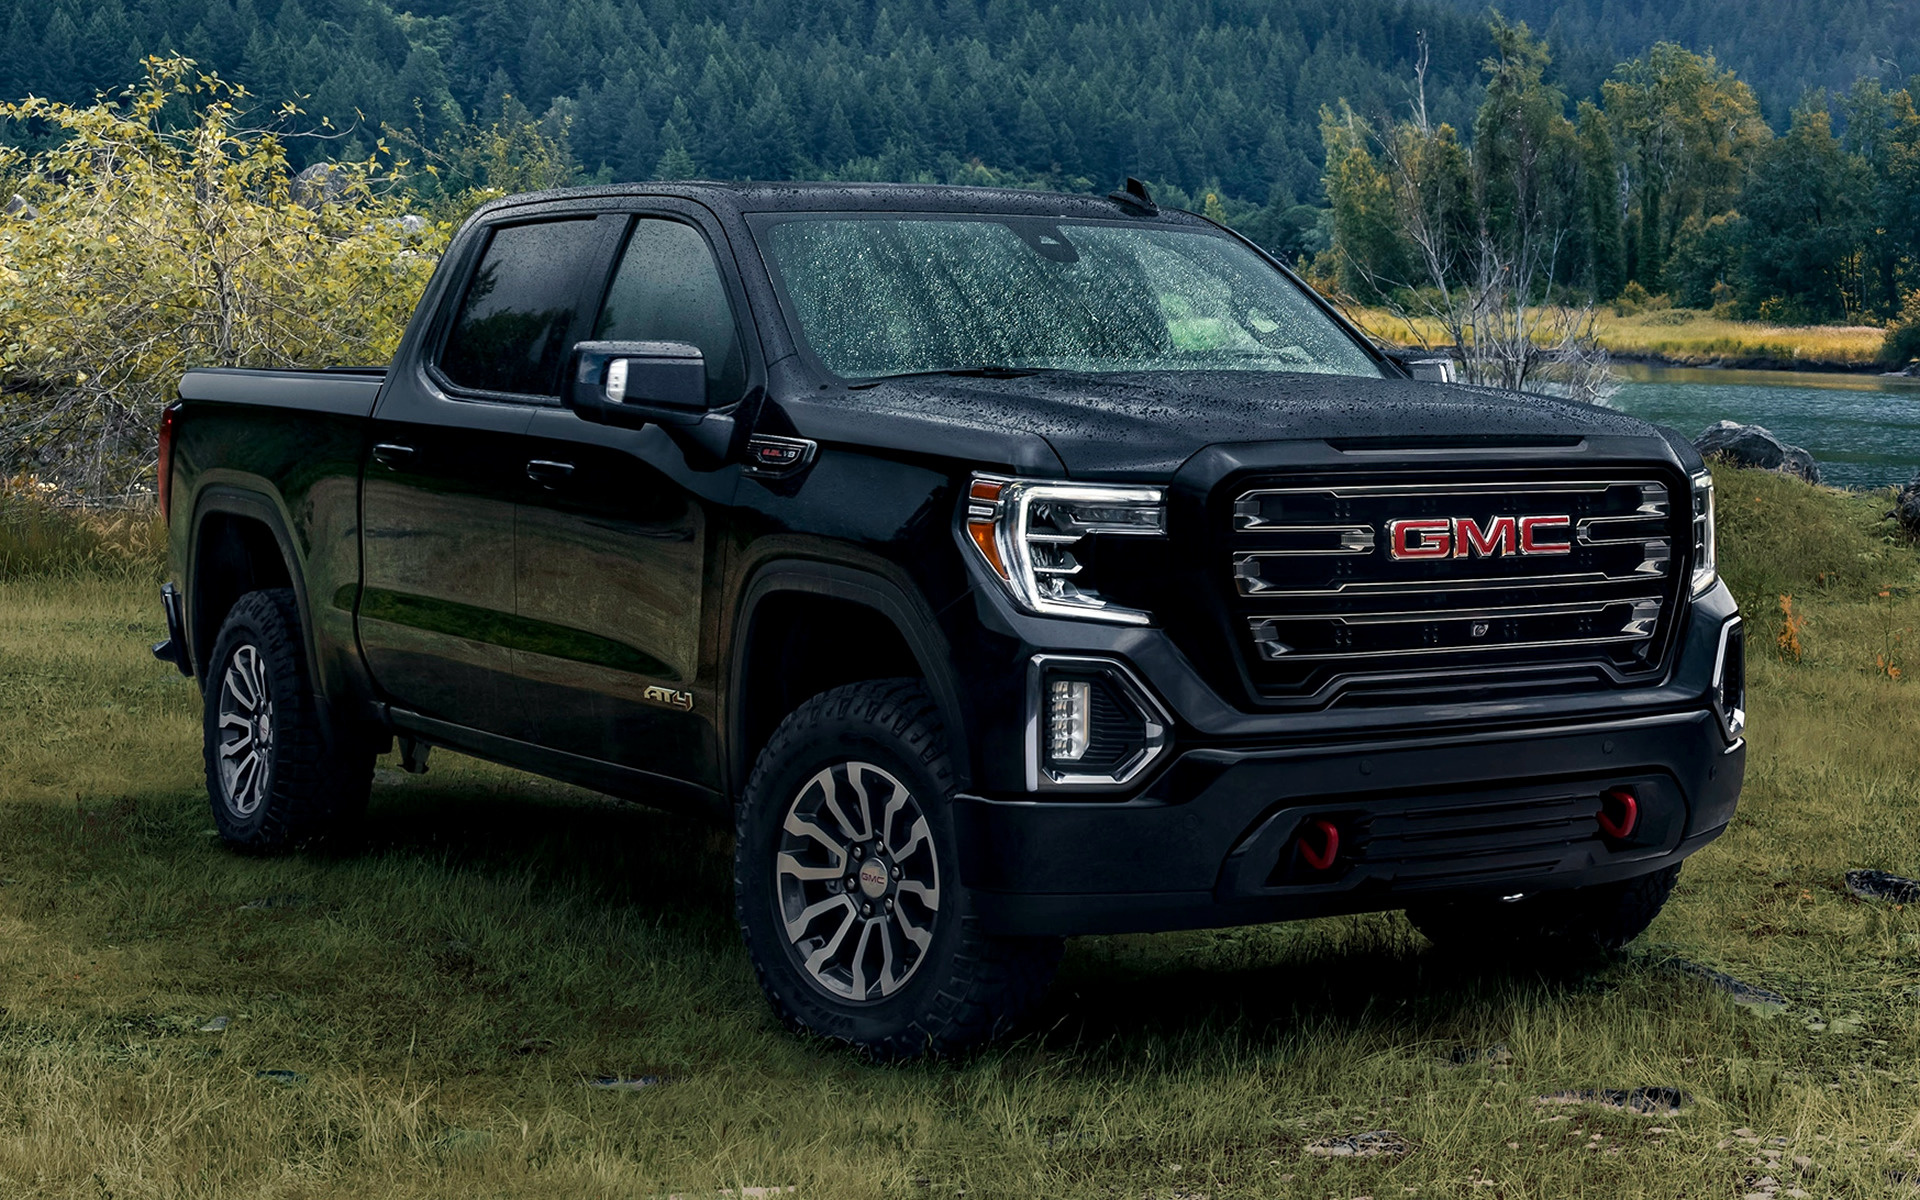 2019 Gmc Sierra At4 Crew Cab Wallpapers And Hd Images Car Pixel